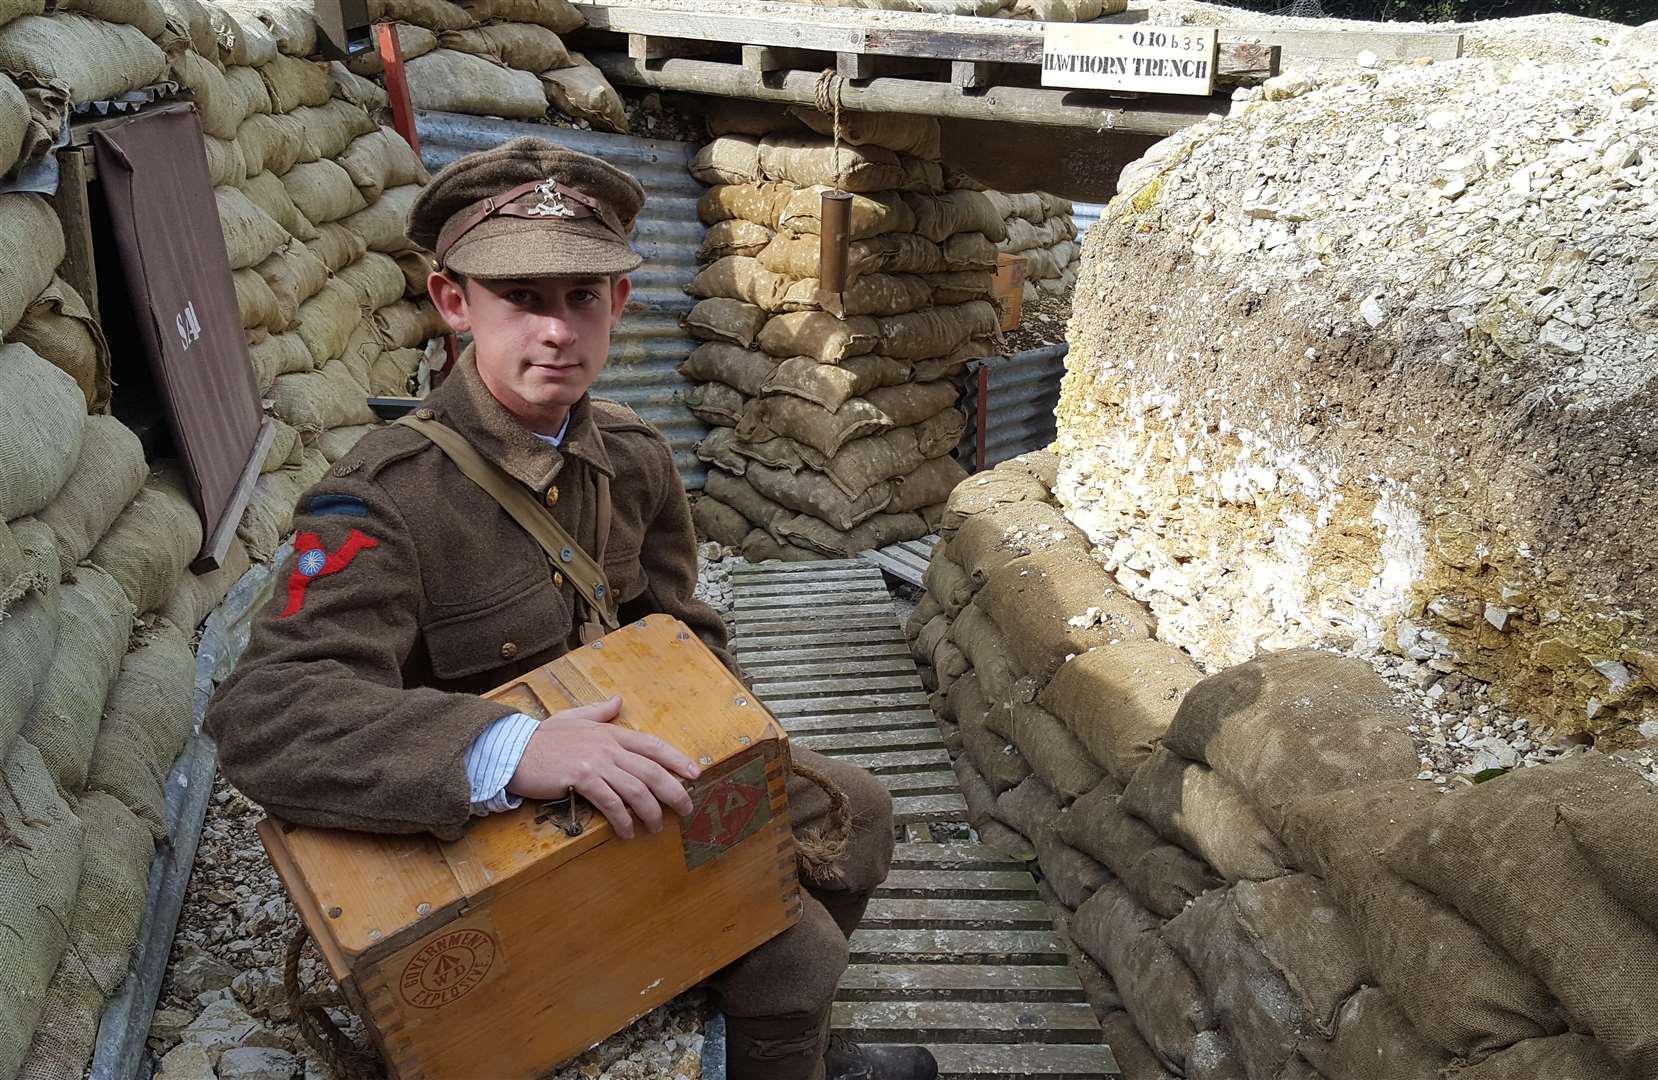 Toby Dingle sits in the trenches he has helped recreate following a visit to the Somme